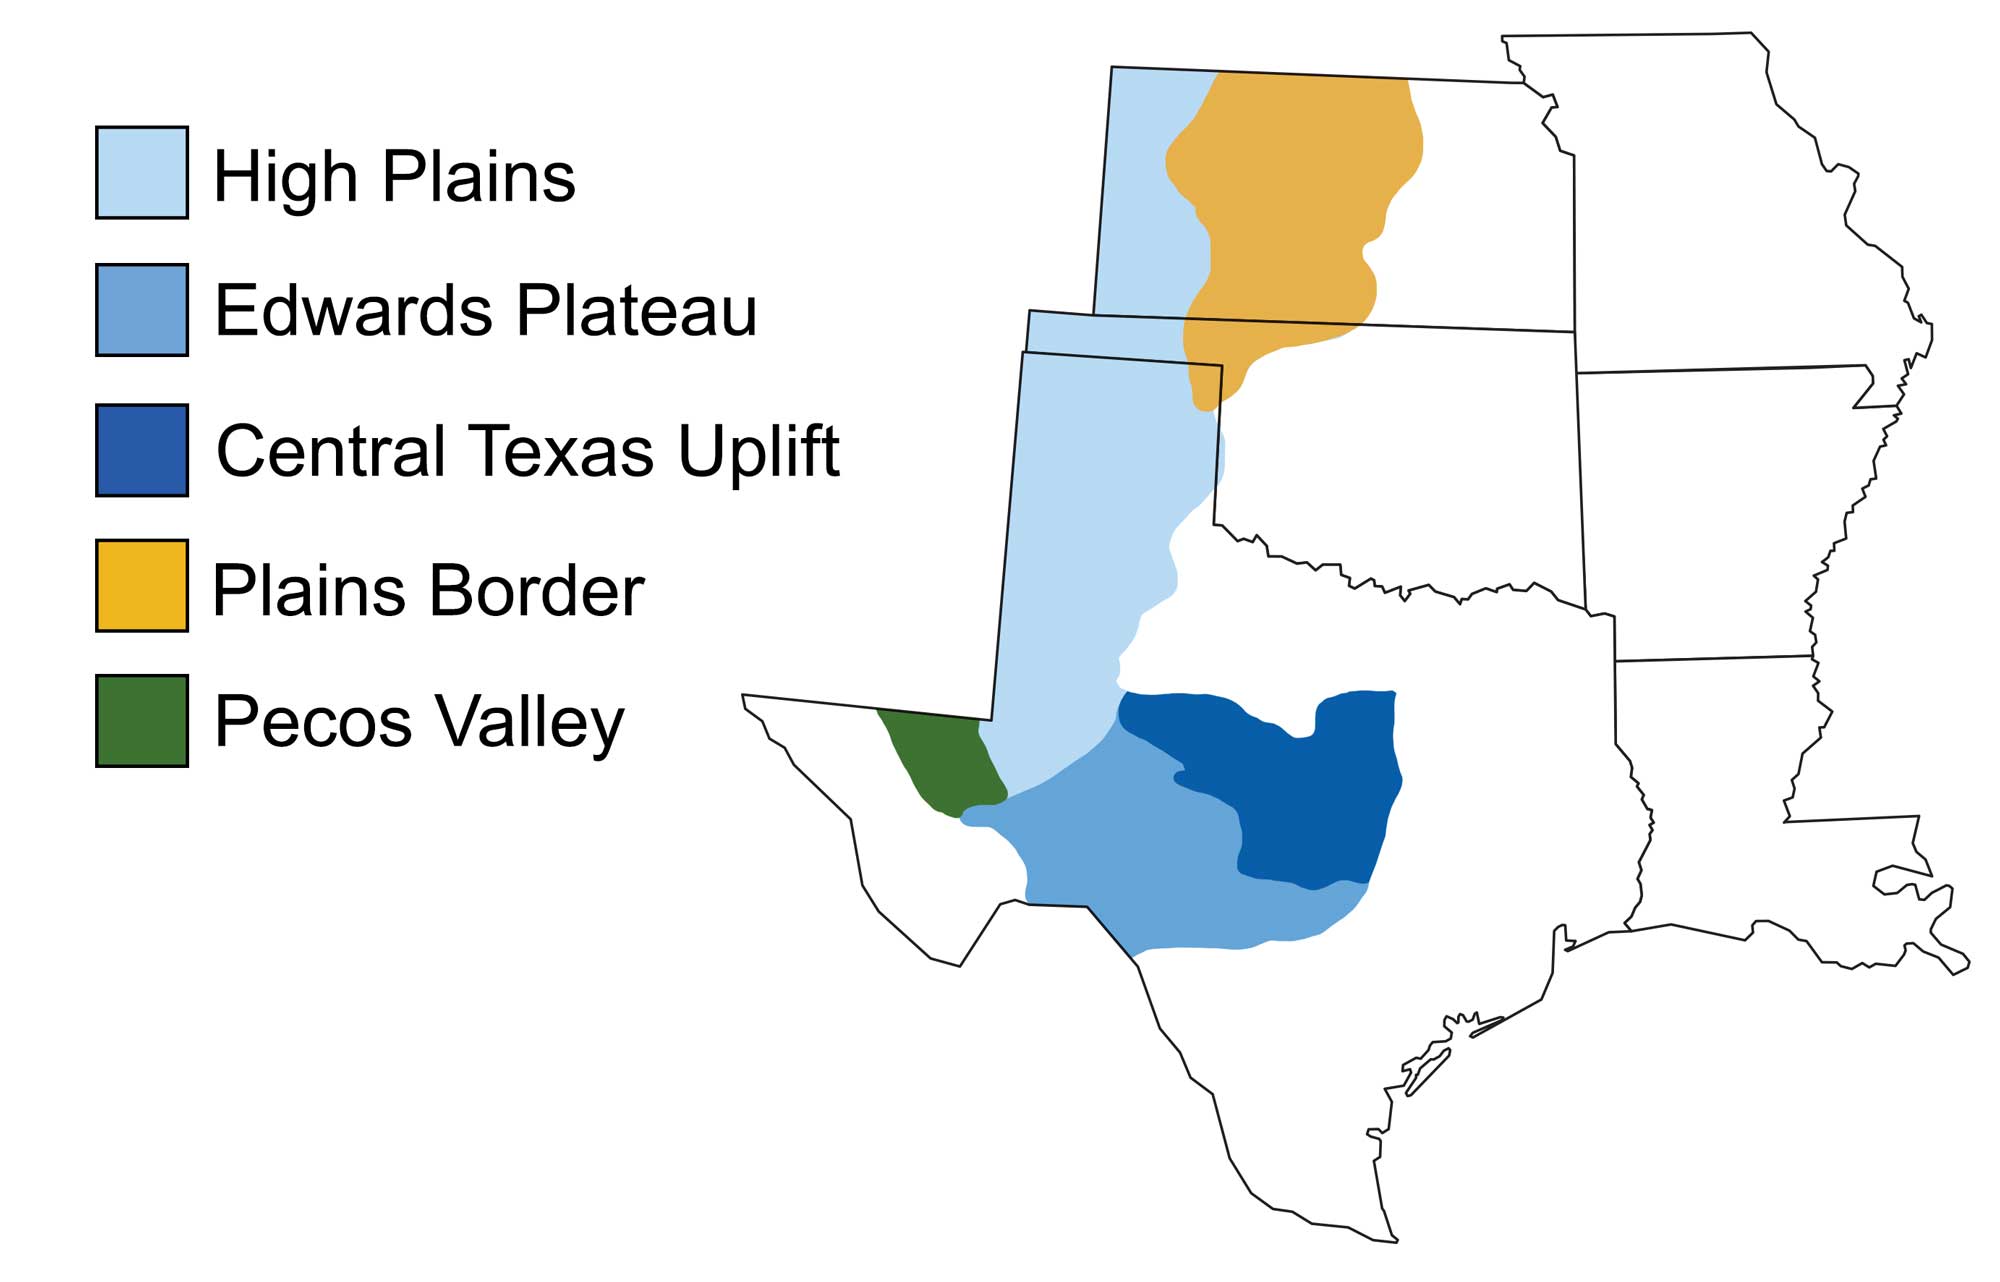 Simple map showing the five topographic subregions of the Great Plains region of the South Central United States.